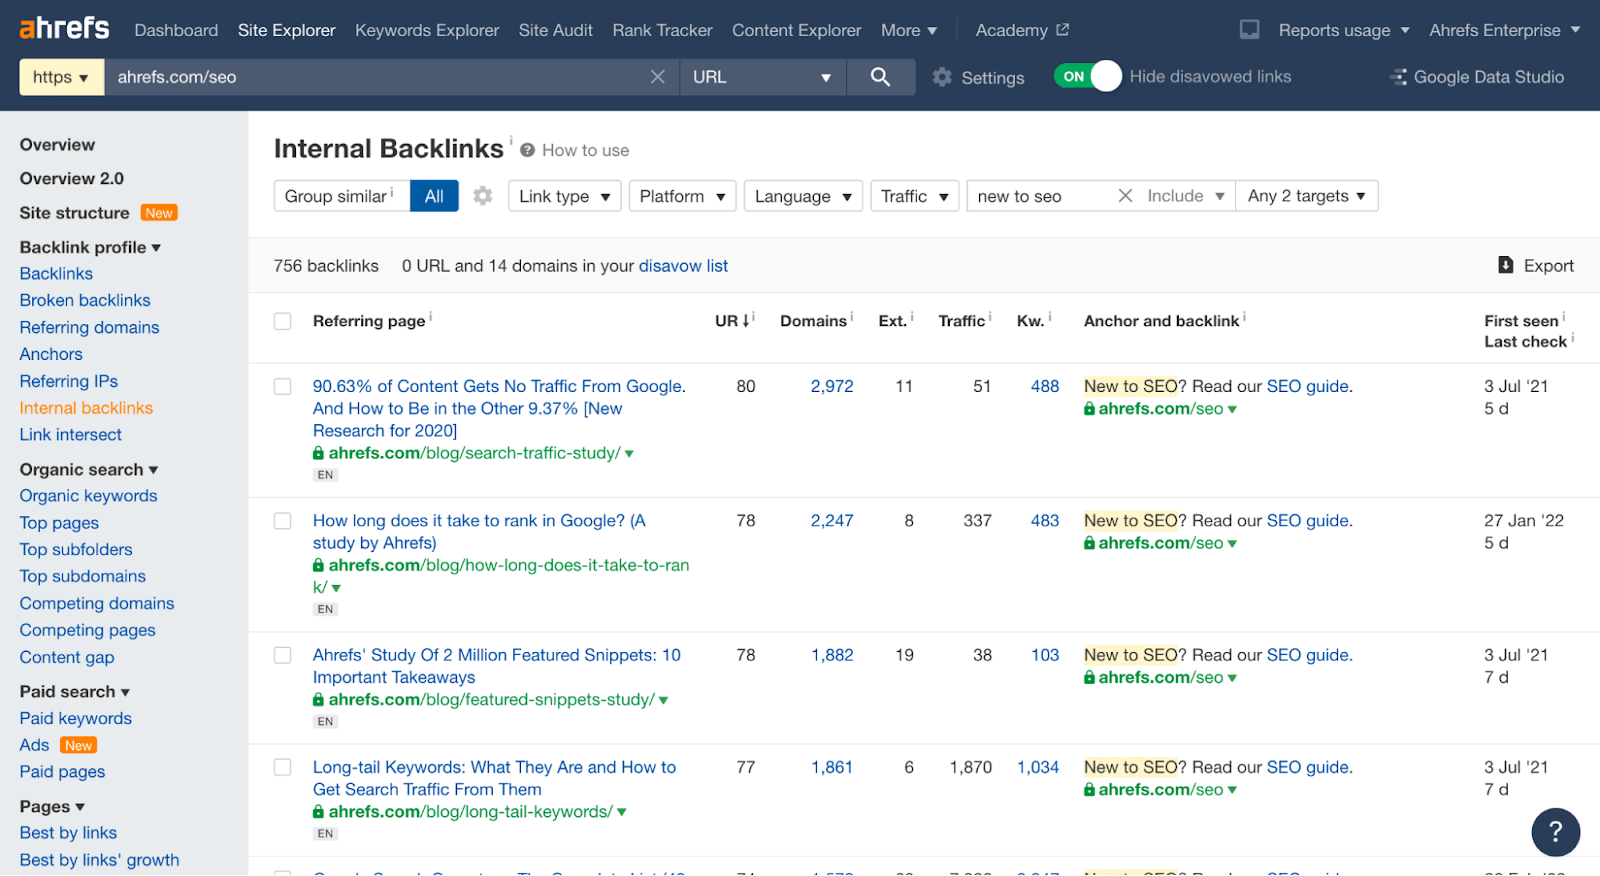 Internal Backlinks report for Ahrefs' guide to SEO in Ahrefs' Site Explorer